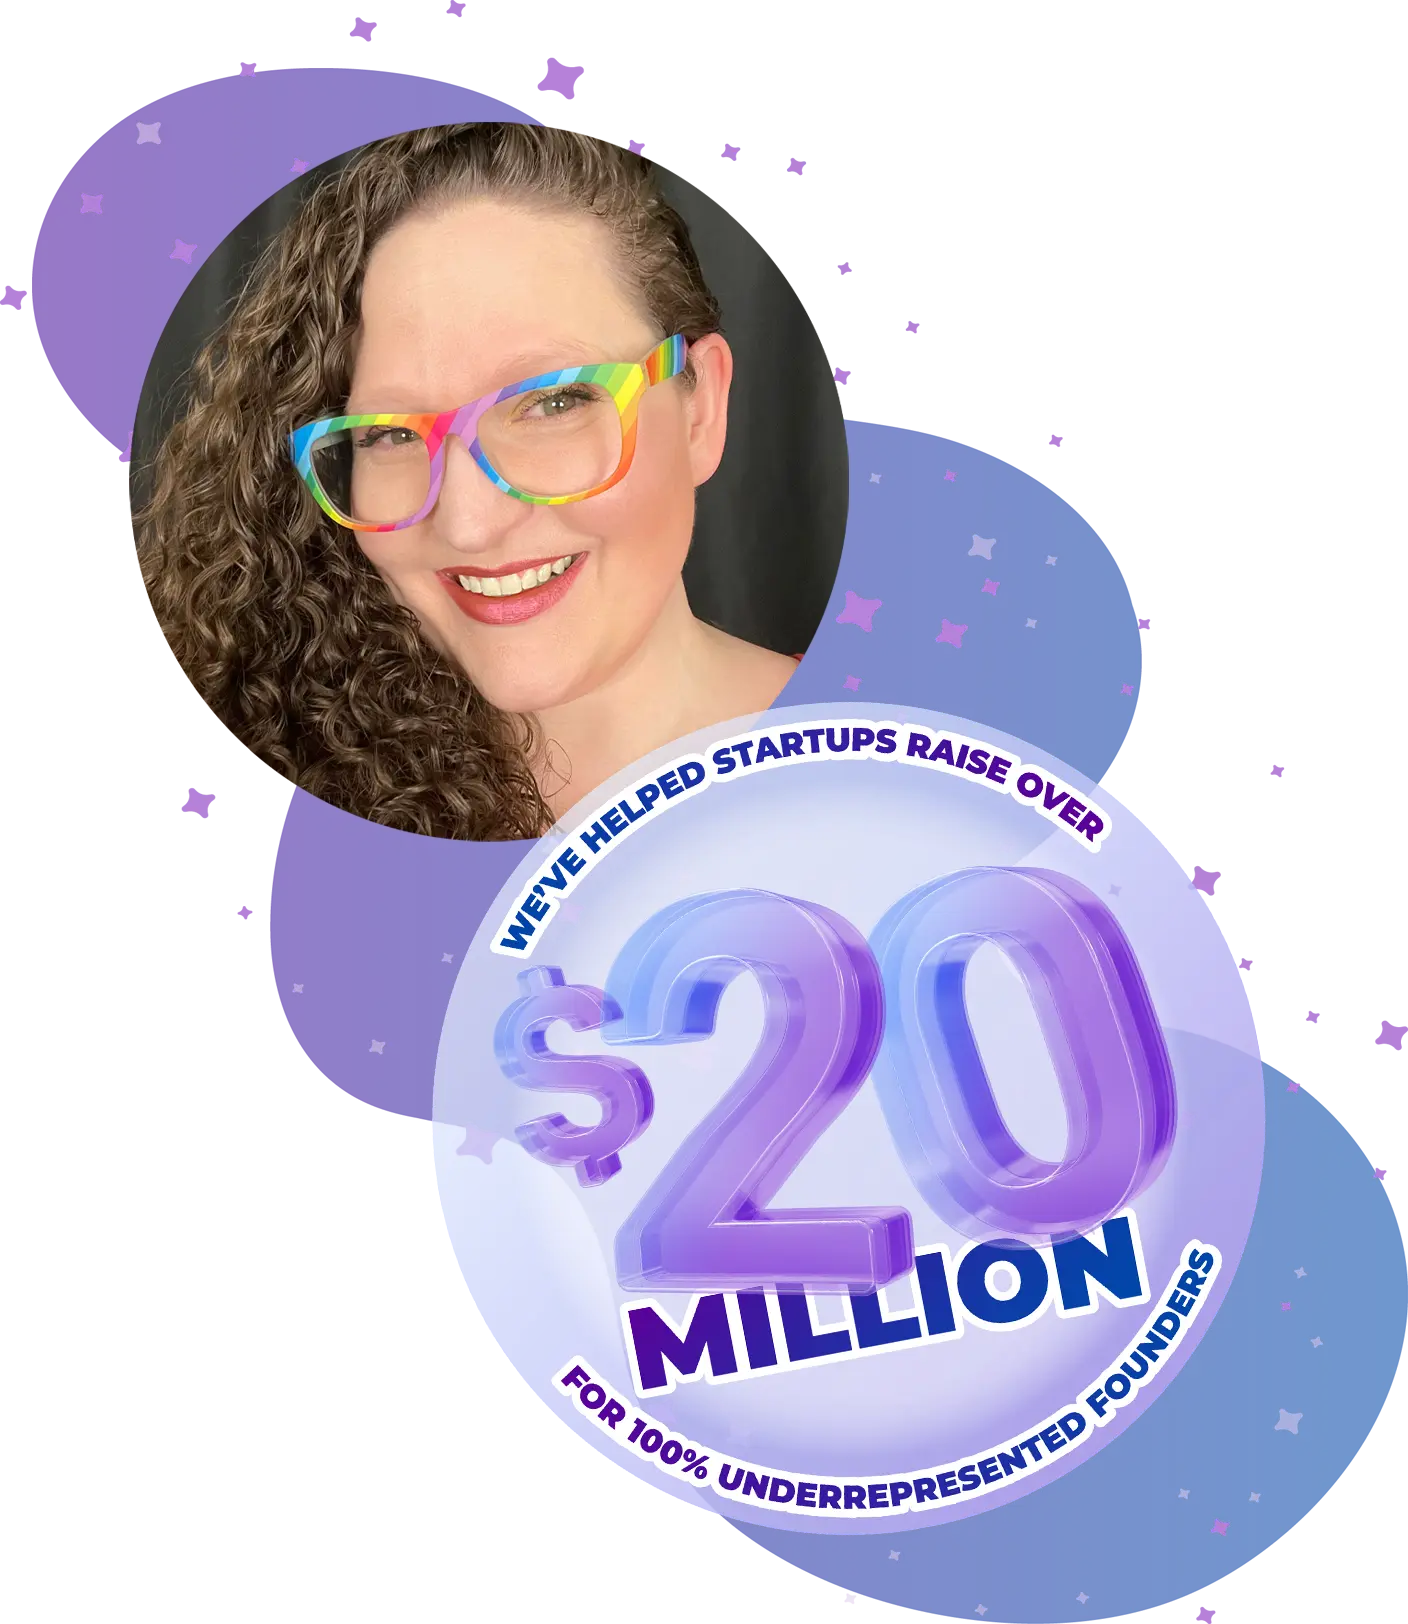 Meet our Founder & CEO, Heather Lawver! Her photo appears as a bubble atop a colorful galaxy. She's a white woman, smiling warmly at the viewer, wearing rainbow-colored glasses. Her hair is reddish brown & excessively curly. Below her photo is a bubble with the words, "We've helped startups raise over $20 million for 100% underrepresented founders". 